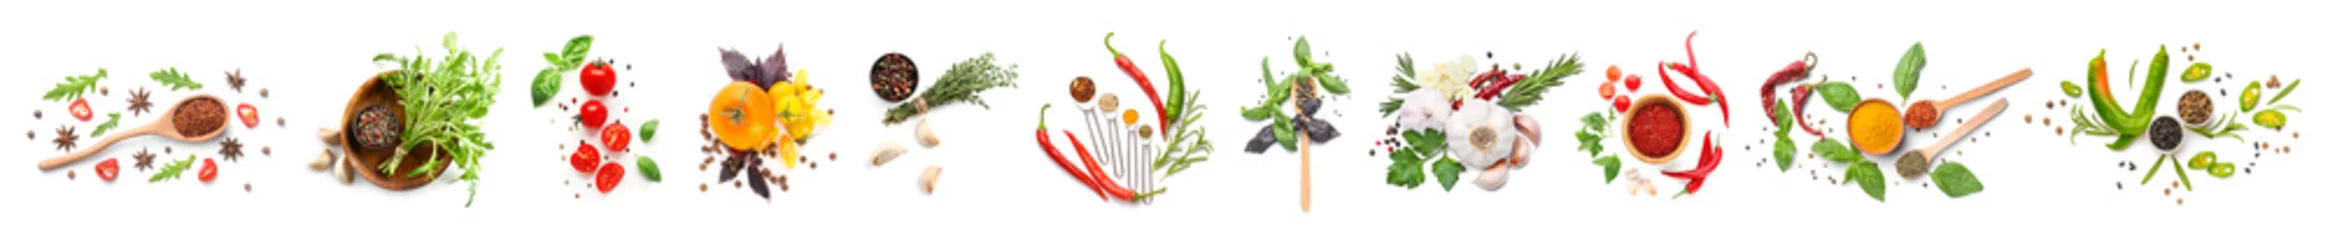 Door stickers Fresh vegetables Different fresh spices, herbs and vegetables on white background